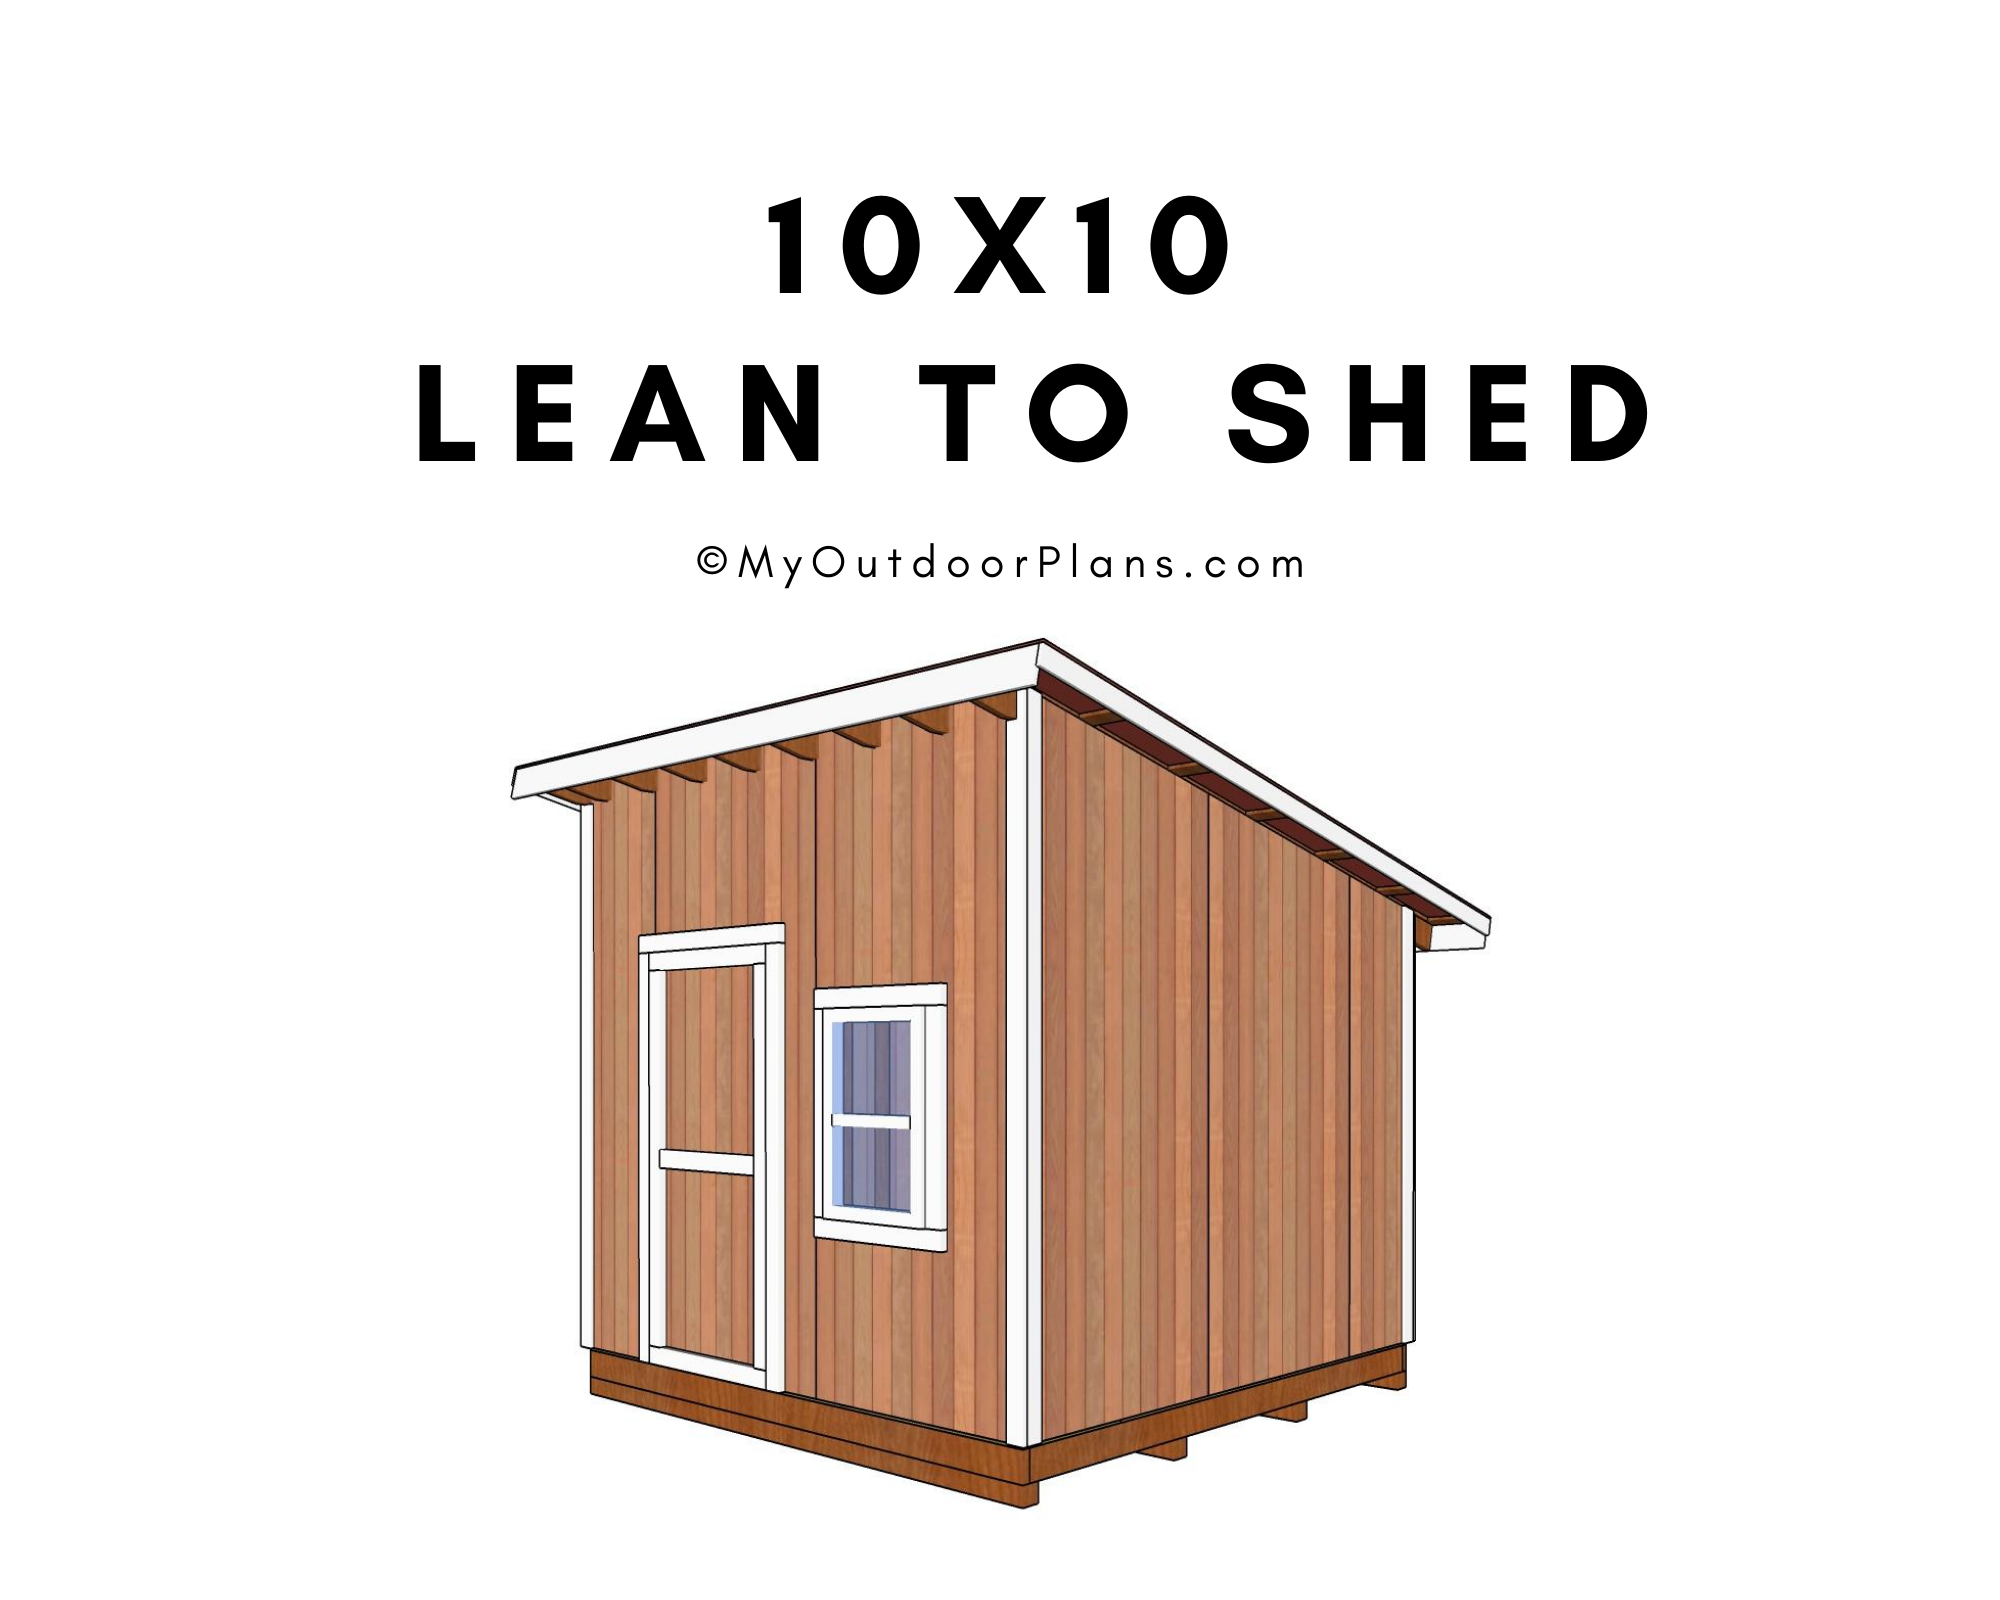 10×10 lean to shed plans | MyOutdoorPlans | Free Woodworking Plans and ...